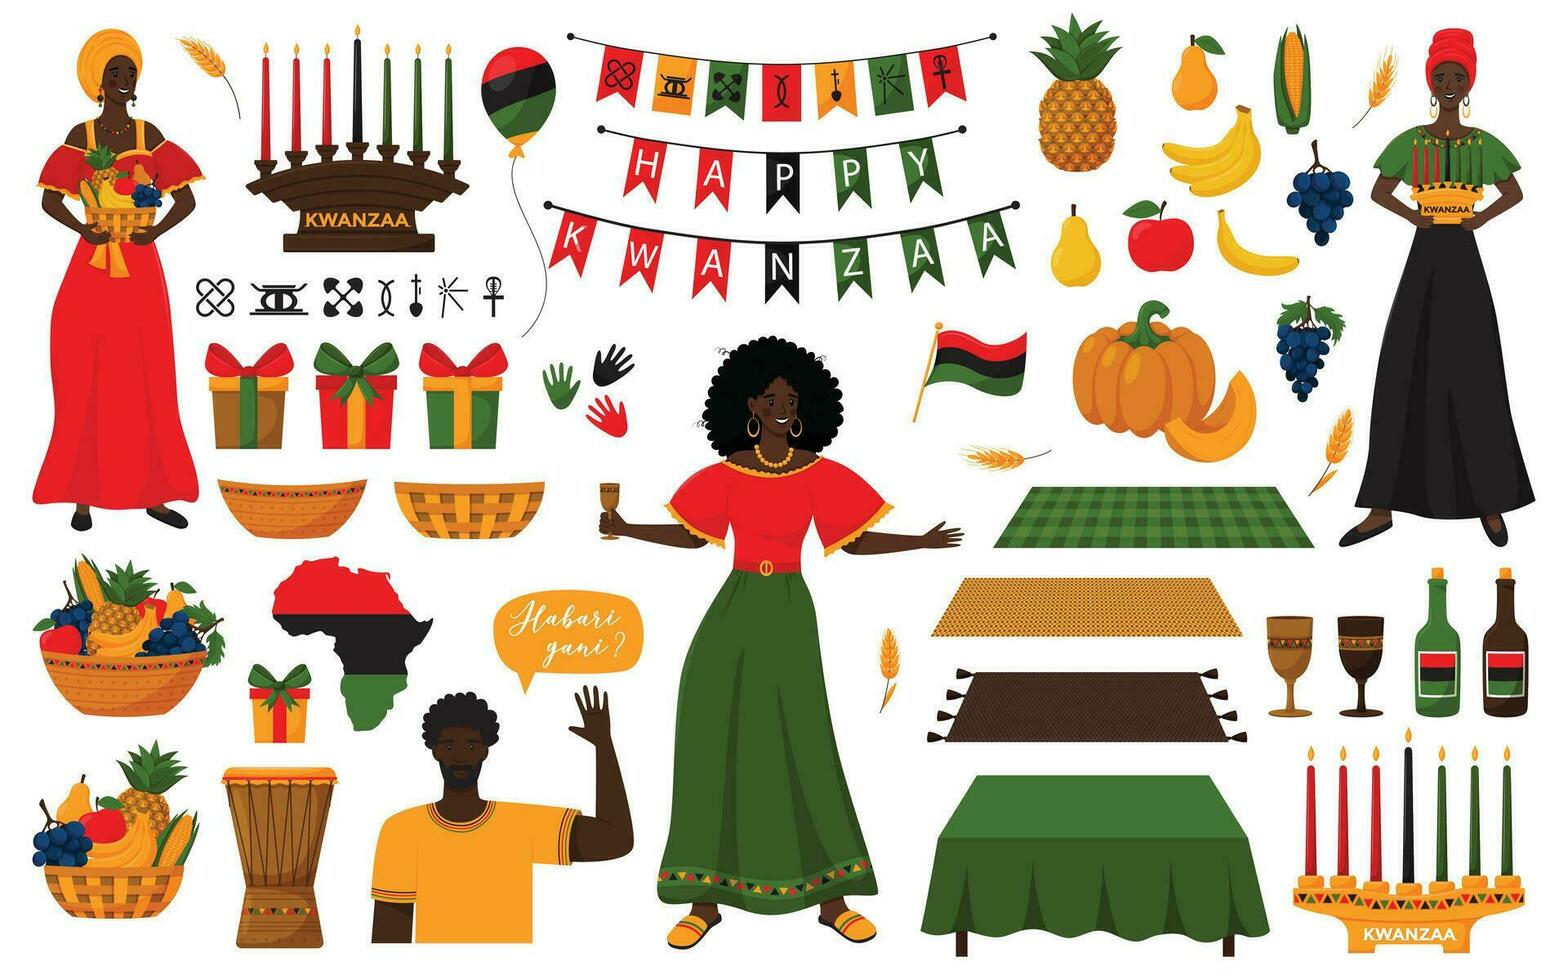 Set of decorative elements for African American holiday Kwanzaa. Women in dresses, Candleholder, Kinara, fruits, gift boxes, mkeka, drum, cup, bottle, signs of principles. Isolated vector illustration